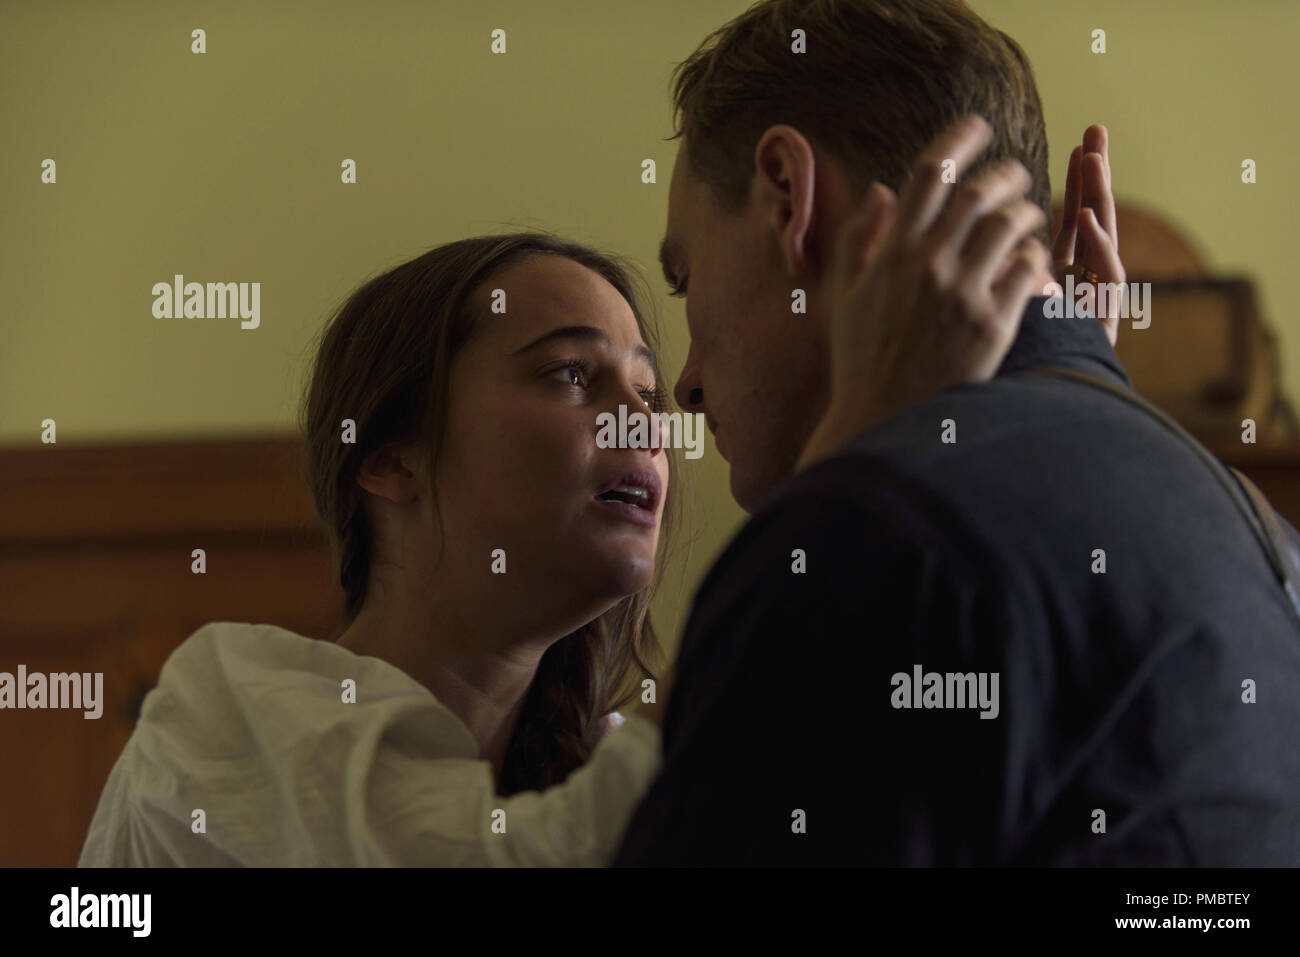 Michael Fassbender is Tom Sherbourne and Alicia Vikander is Isabel in the poignant THE LIGHT BETWEEN OCEANS, written and directed by Derek Cianfrance and based on the acclaimed novel by M. L. Steadman. Stock Photo